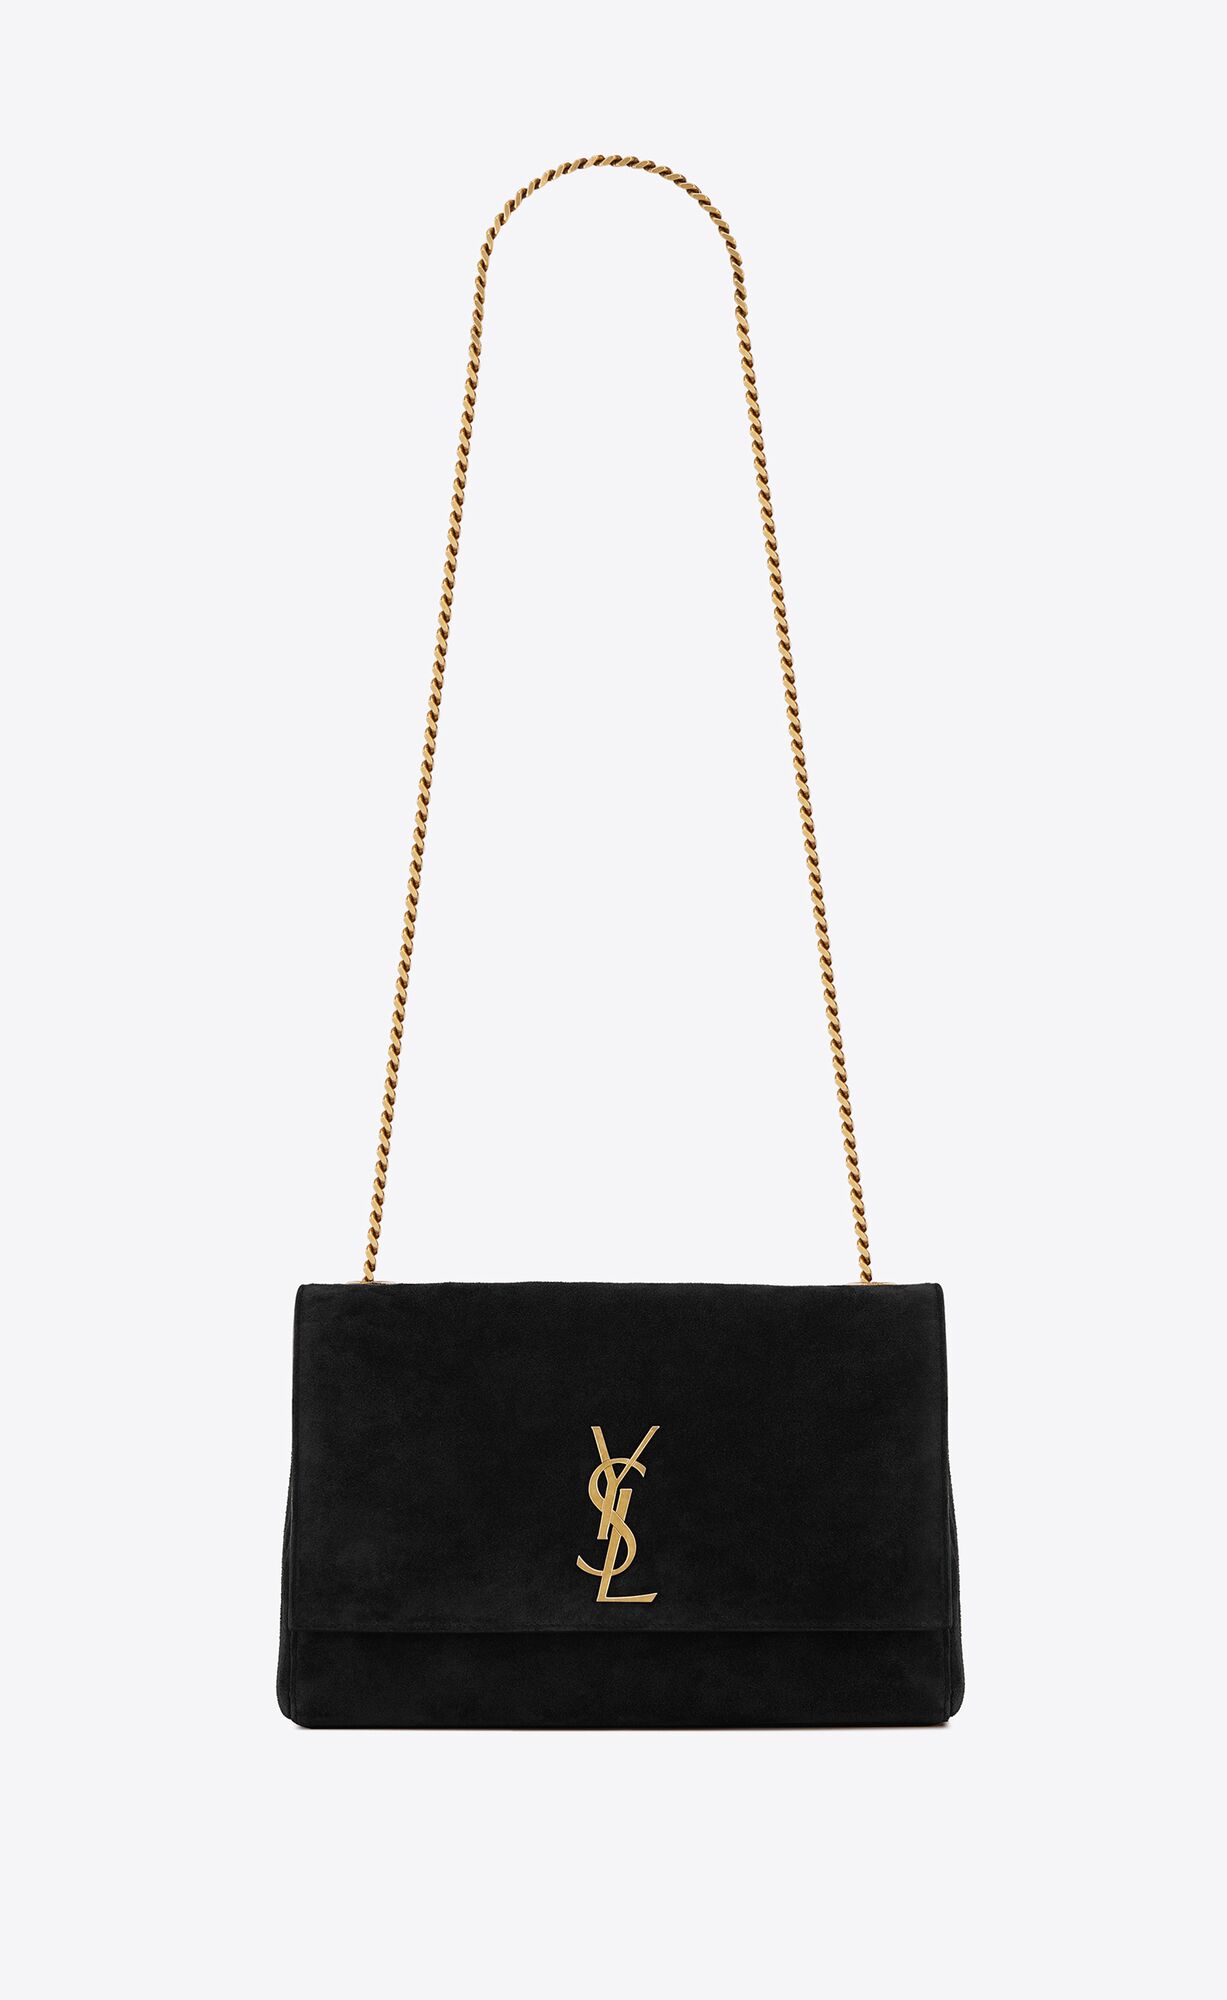 Saint Laurent Kate Medium Reversible In Suede And Smooth Leather – Black – 5538040UD7W1000